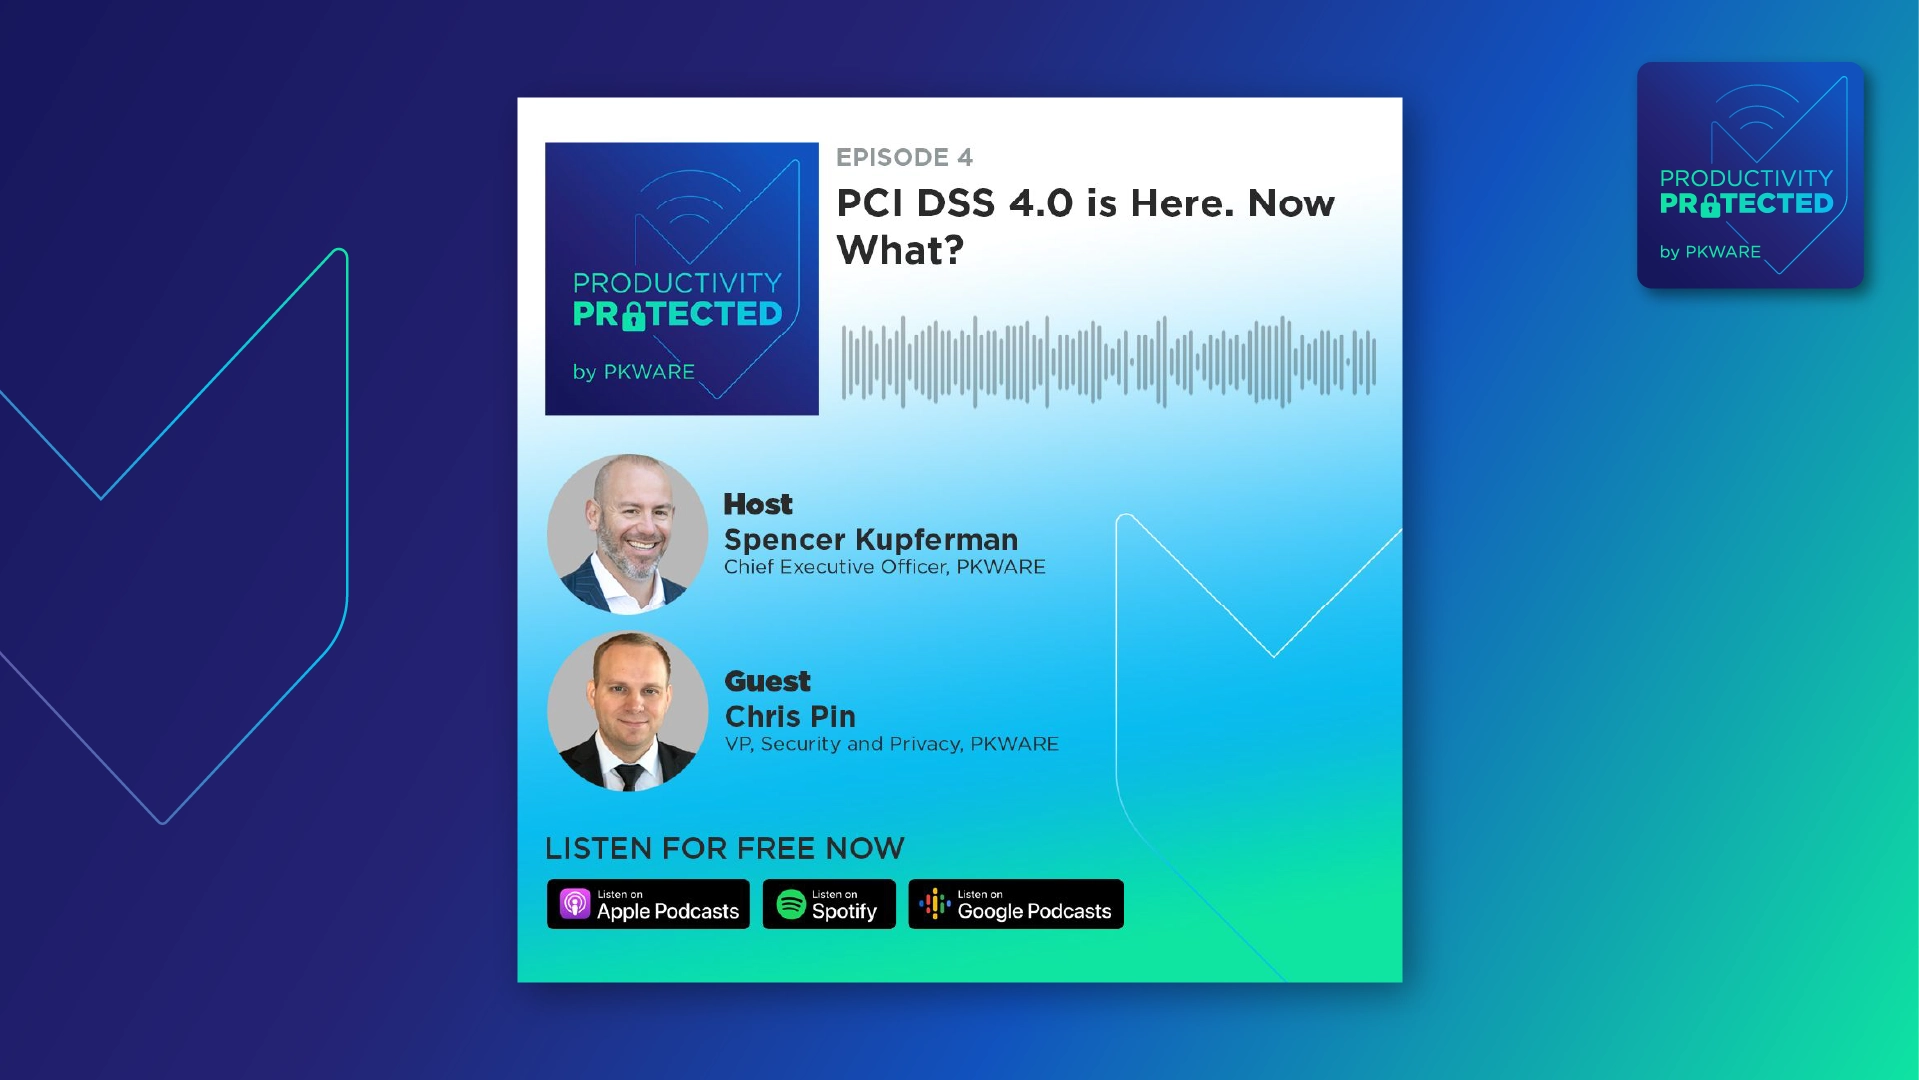 PCI DSS 4.0 is Here. Now What?